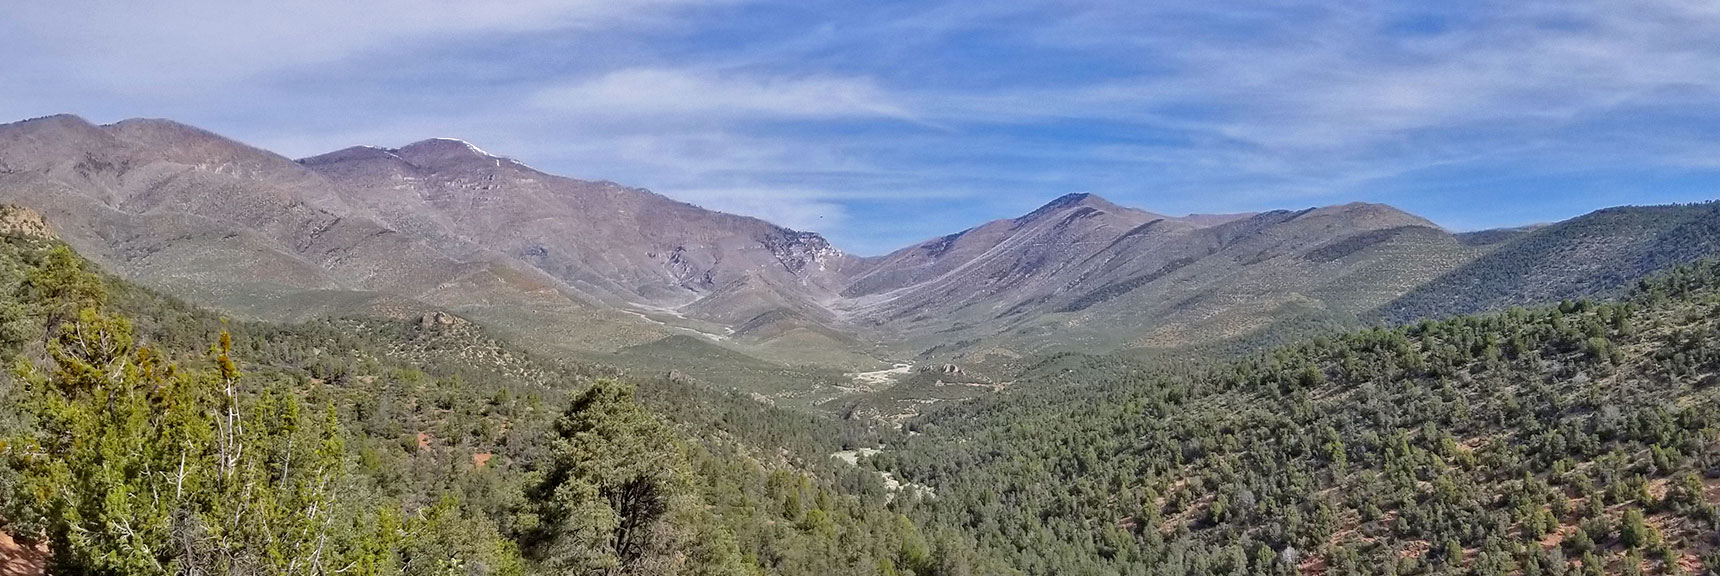 View of Griffith Peak, Harris Mountain and Saddle from Lovell Canyon Trail, La Madre Mountains Wilderness, Nevada